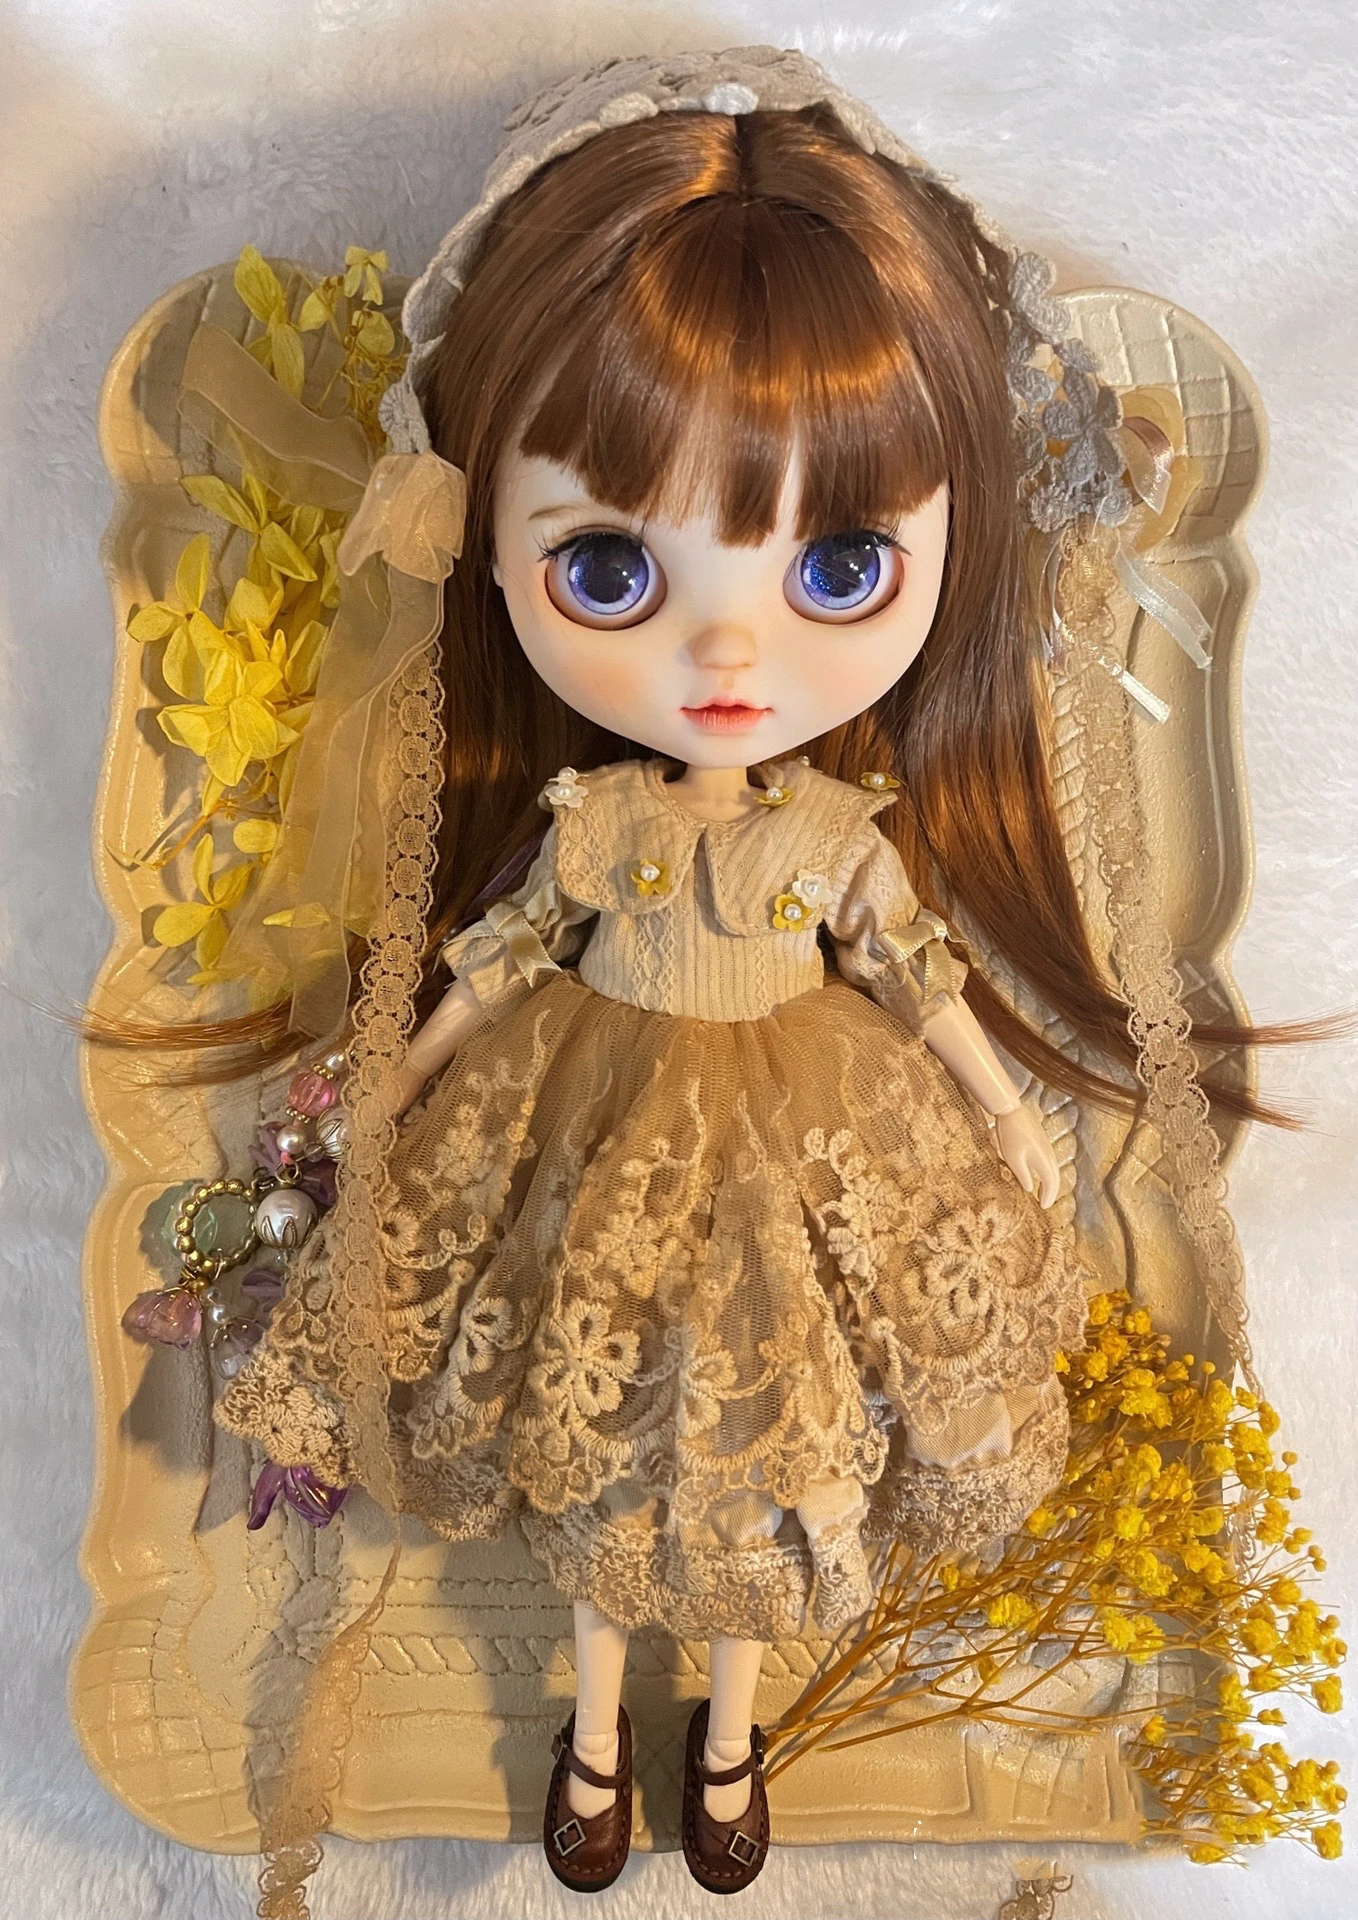 

Tea dyeing series Blythe clothes dress Flower Sea Lace puffy skirt dressing 1/6 30cm BJD anime girl (Fit for Pullip,Ob24, Licca)